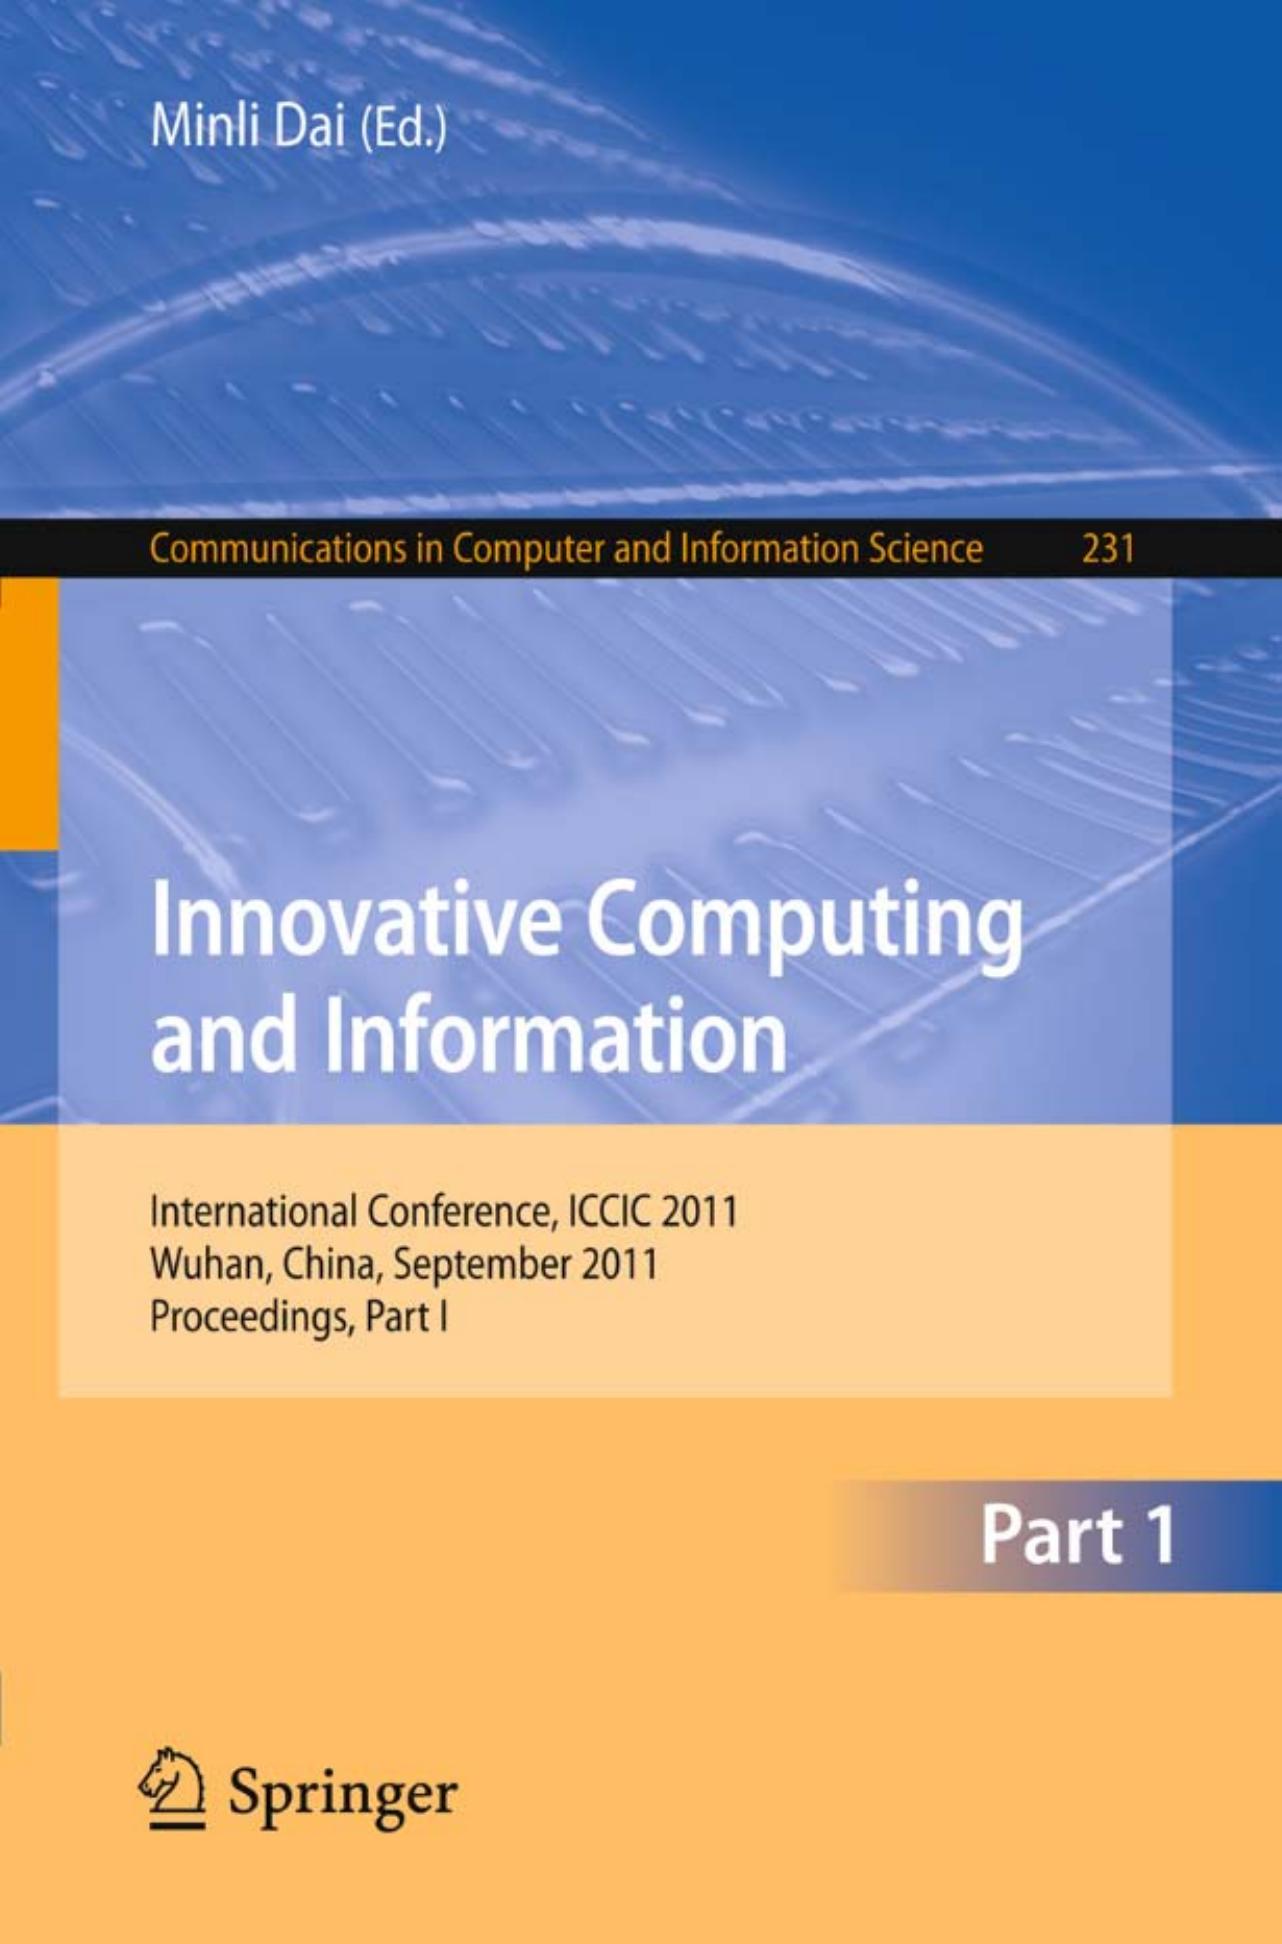 Innovative Computing and Information, Part I - ICCIC 2011 (Communications in Computer and Information Science, 231)